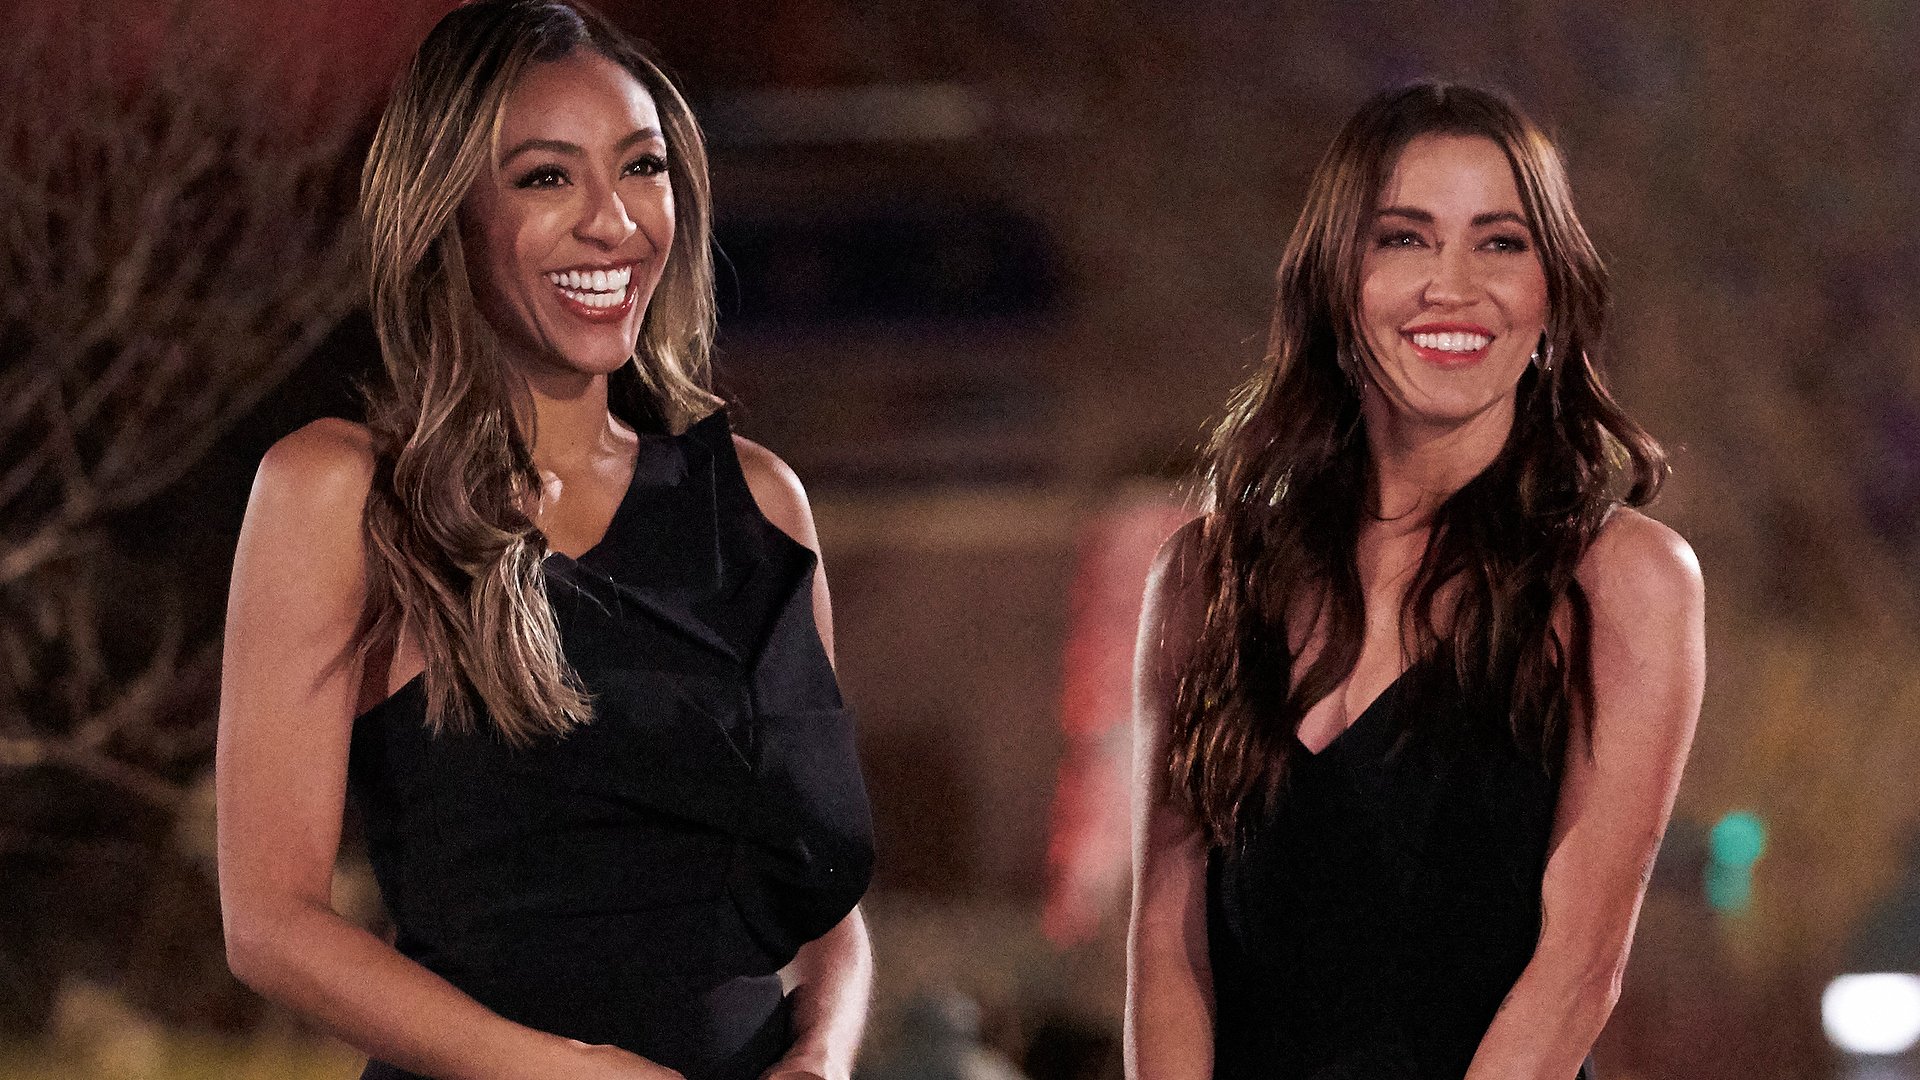 ‘The Bachelorette’: How Do Tayshia Adams and Kaitlyn Bristowe Feel About Replacing Chris Harrison After His Permanent Exit?